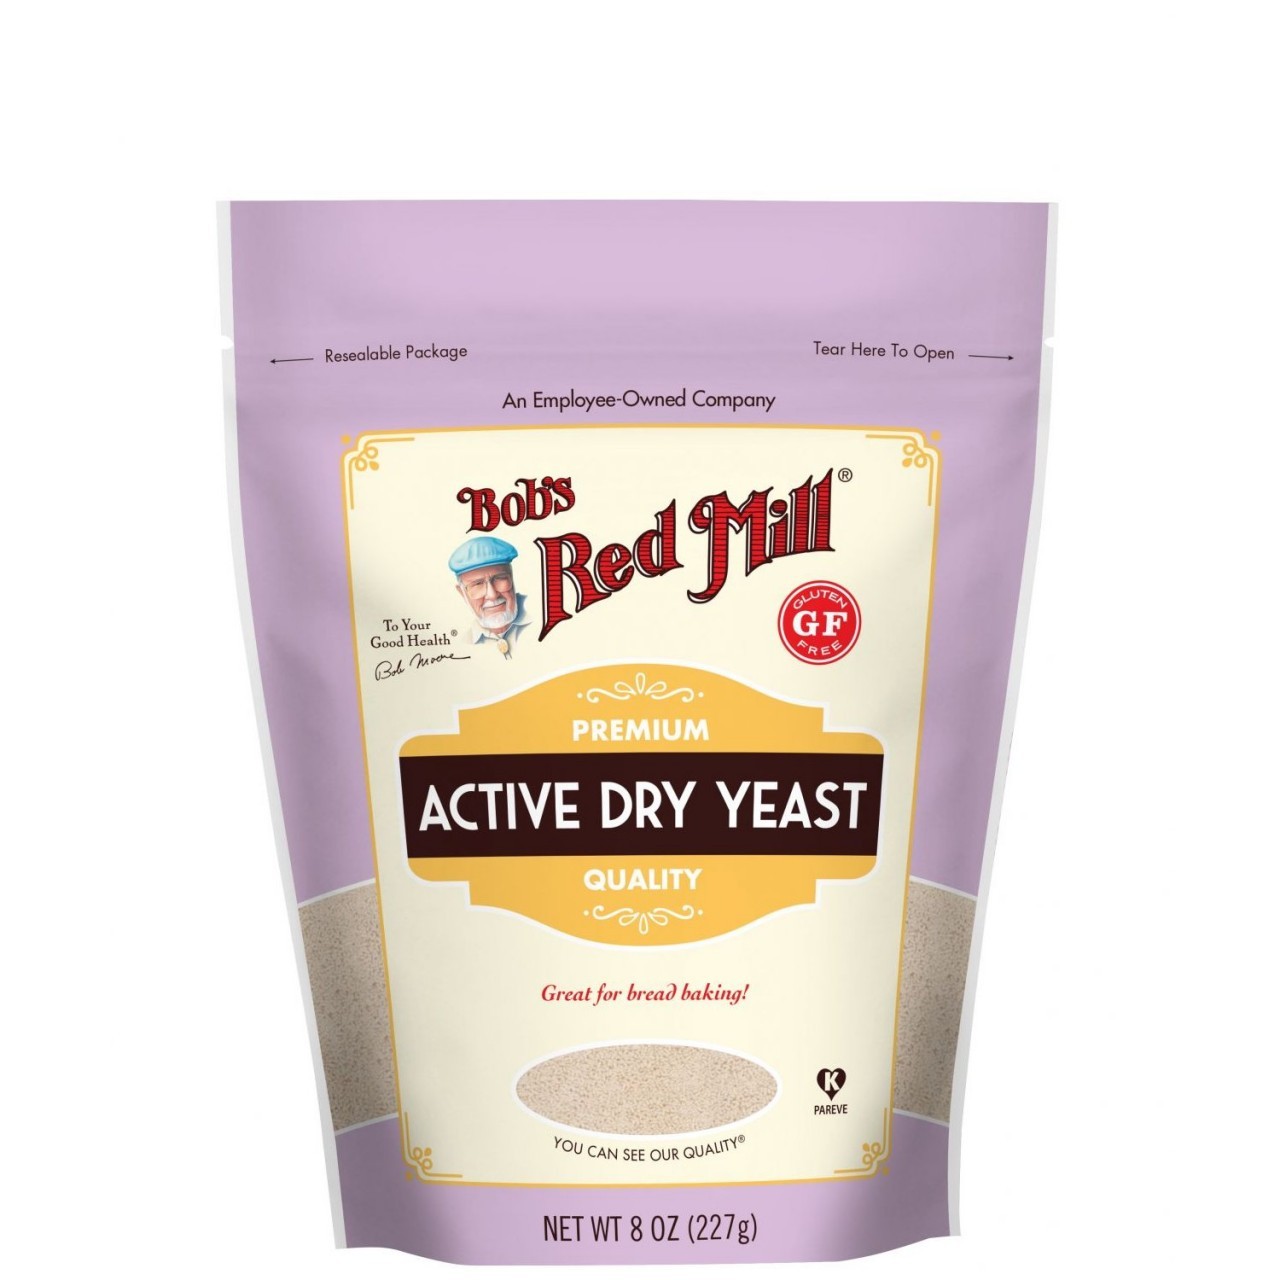 BOBS RED MILL ACTIVE DRY YEAST GF 8oz